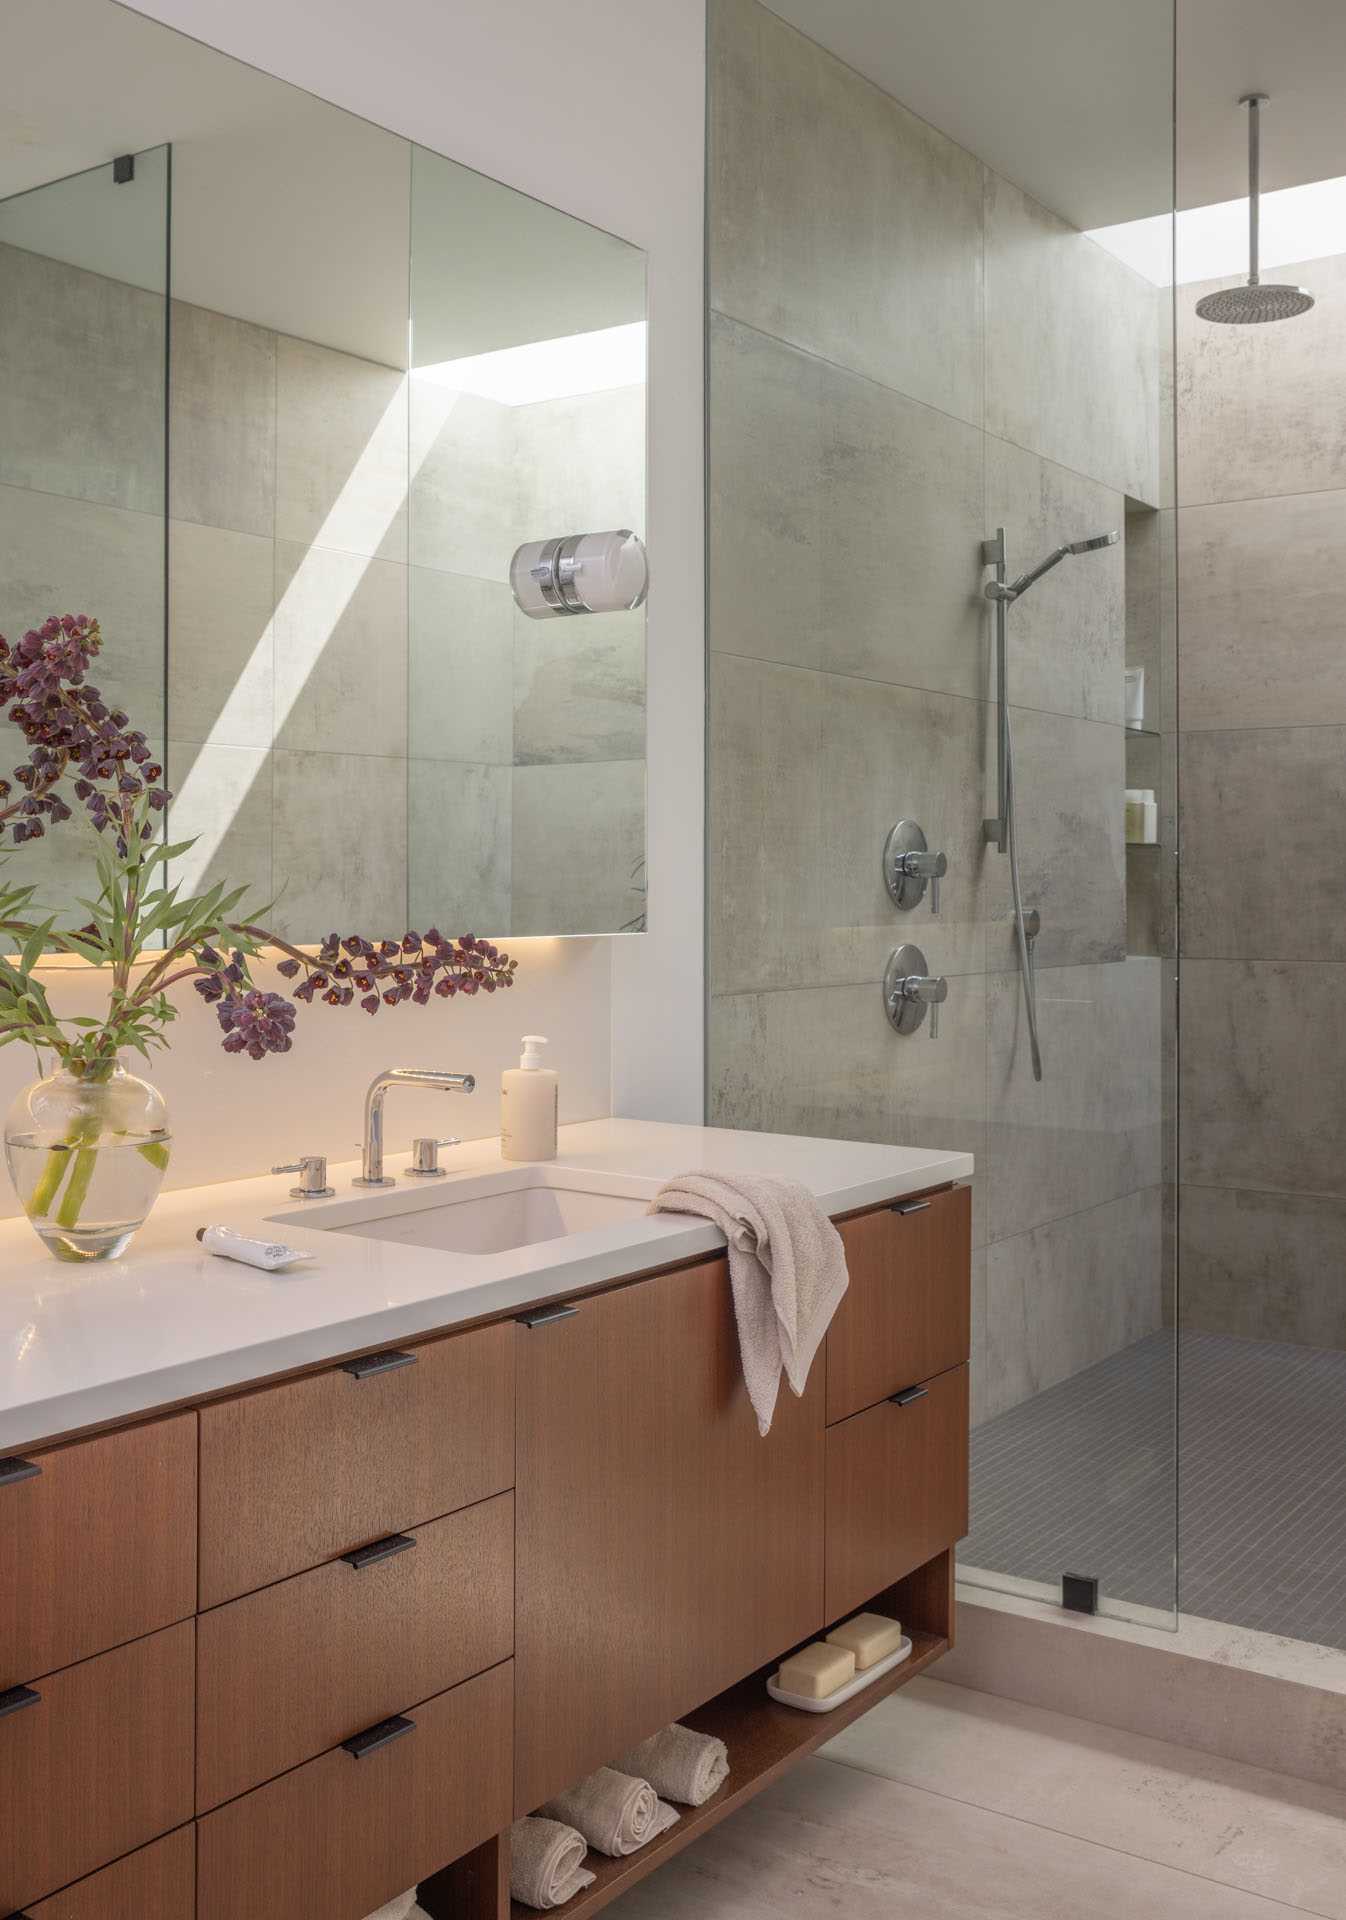 A modern bathroom with a wide skylight in the wet room and a strategically placed mirror that makes the room feel larger.